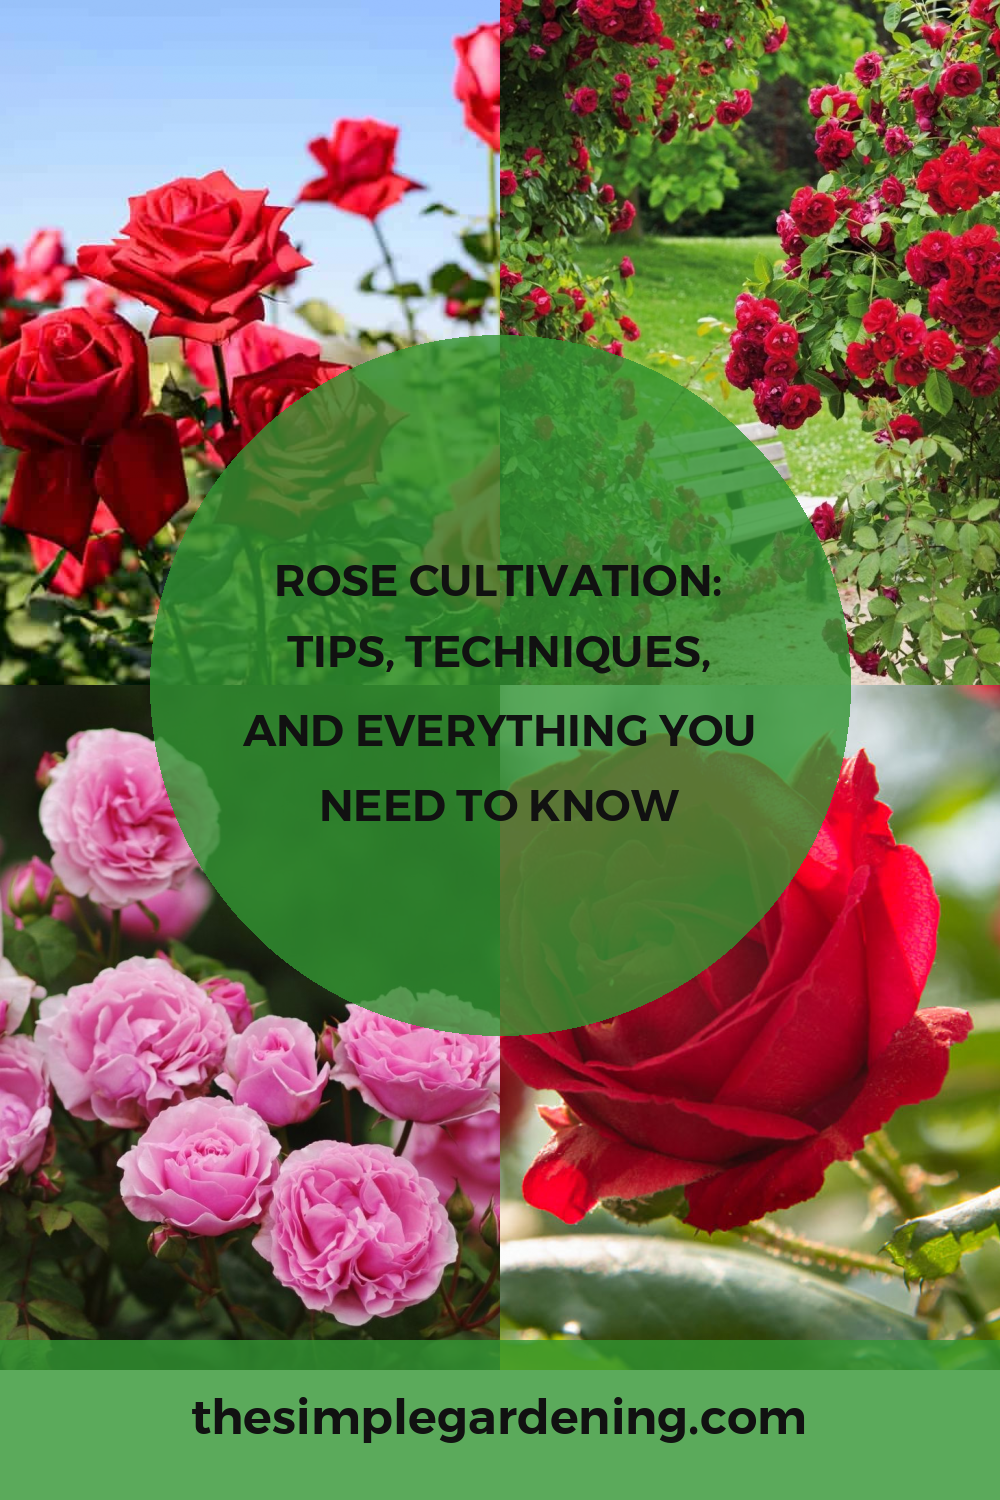 Rose Cultivation: Tips, Techniques, and Everything You Need to Know